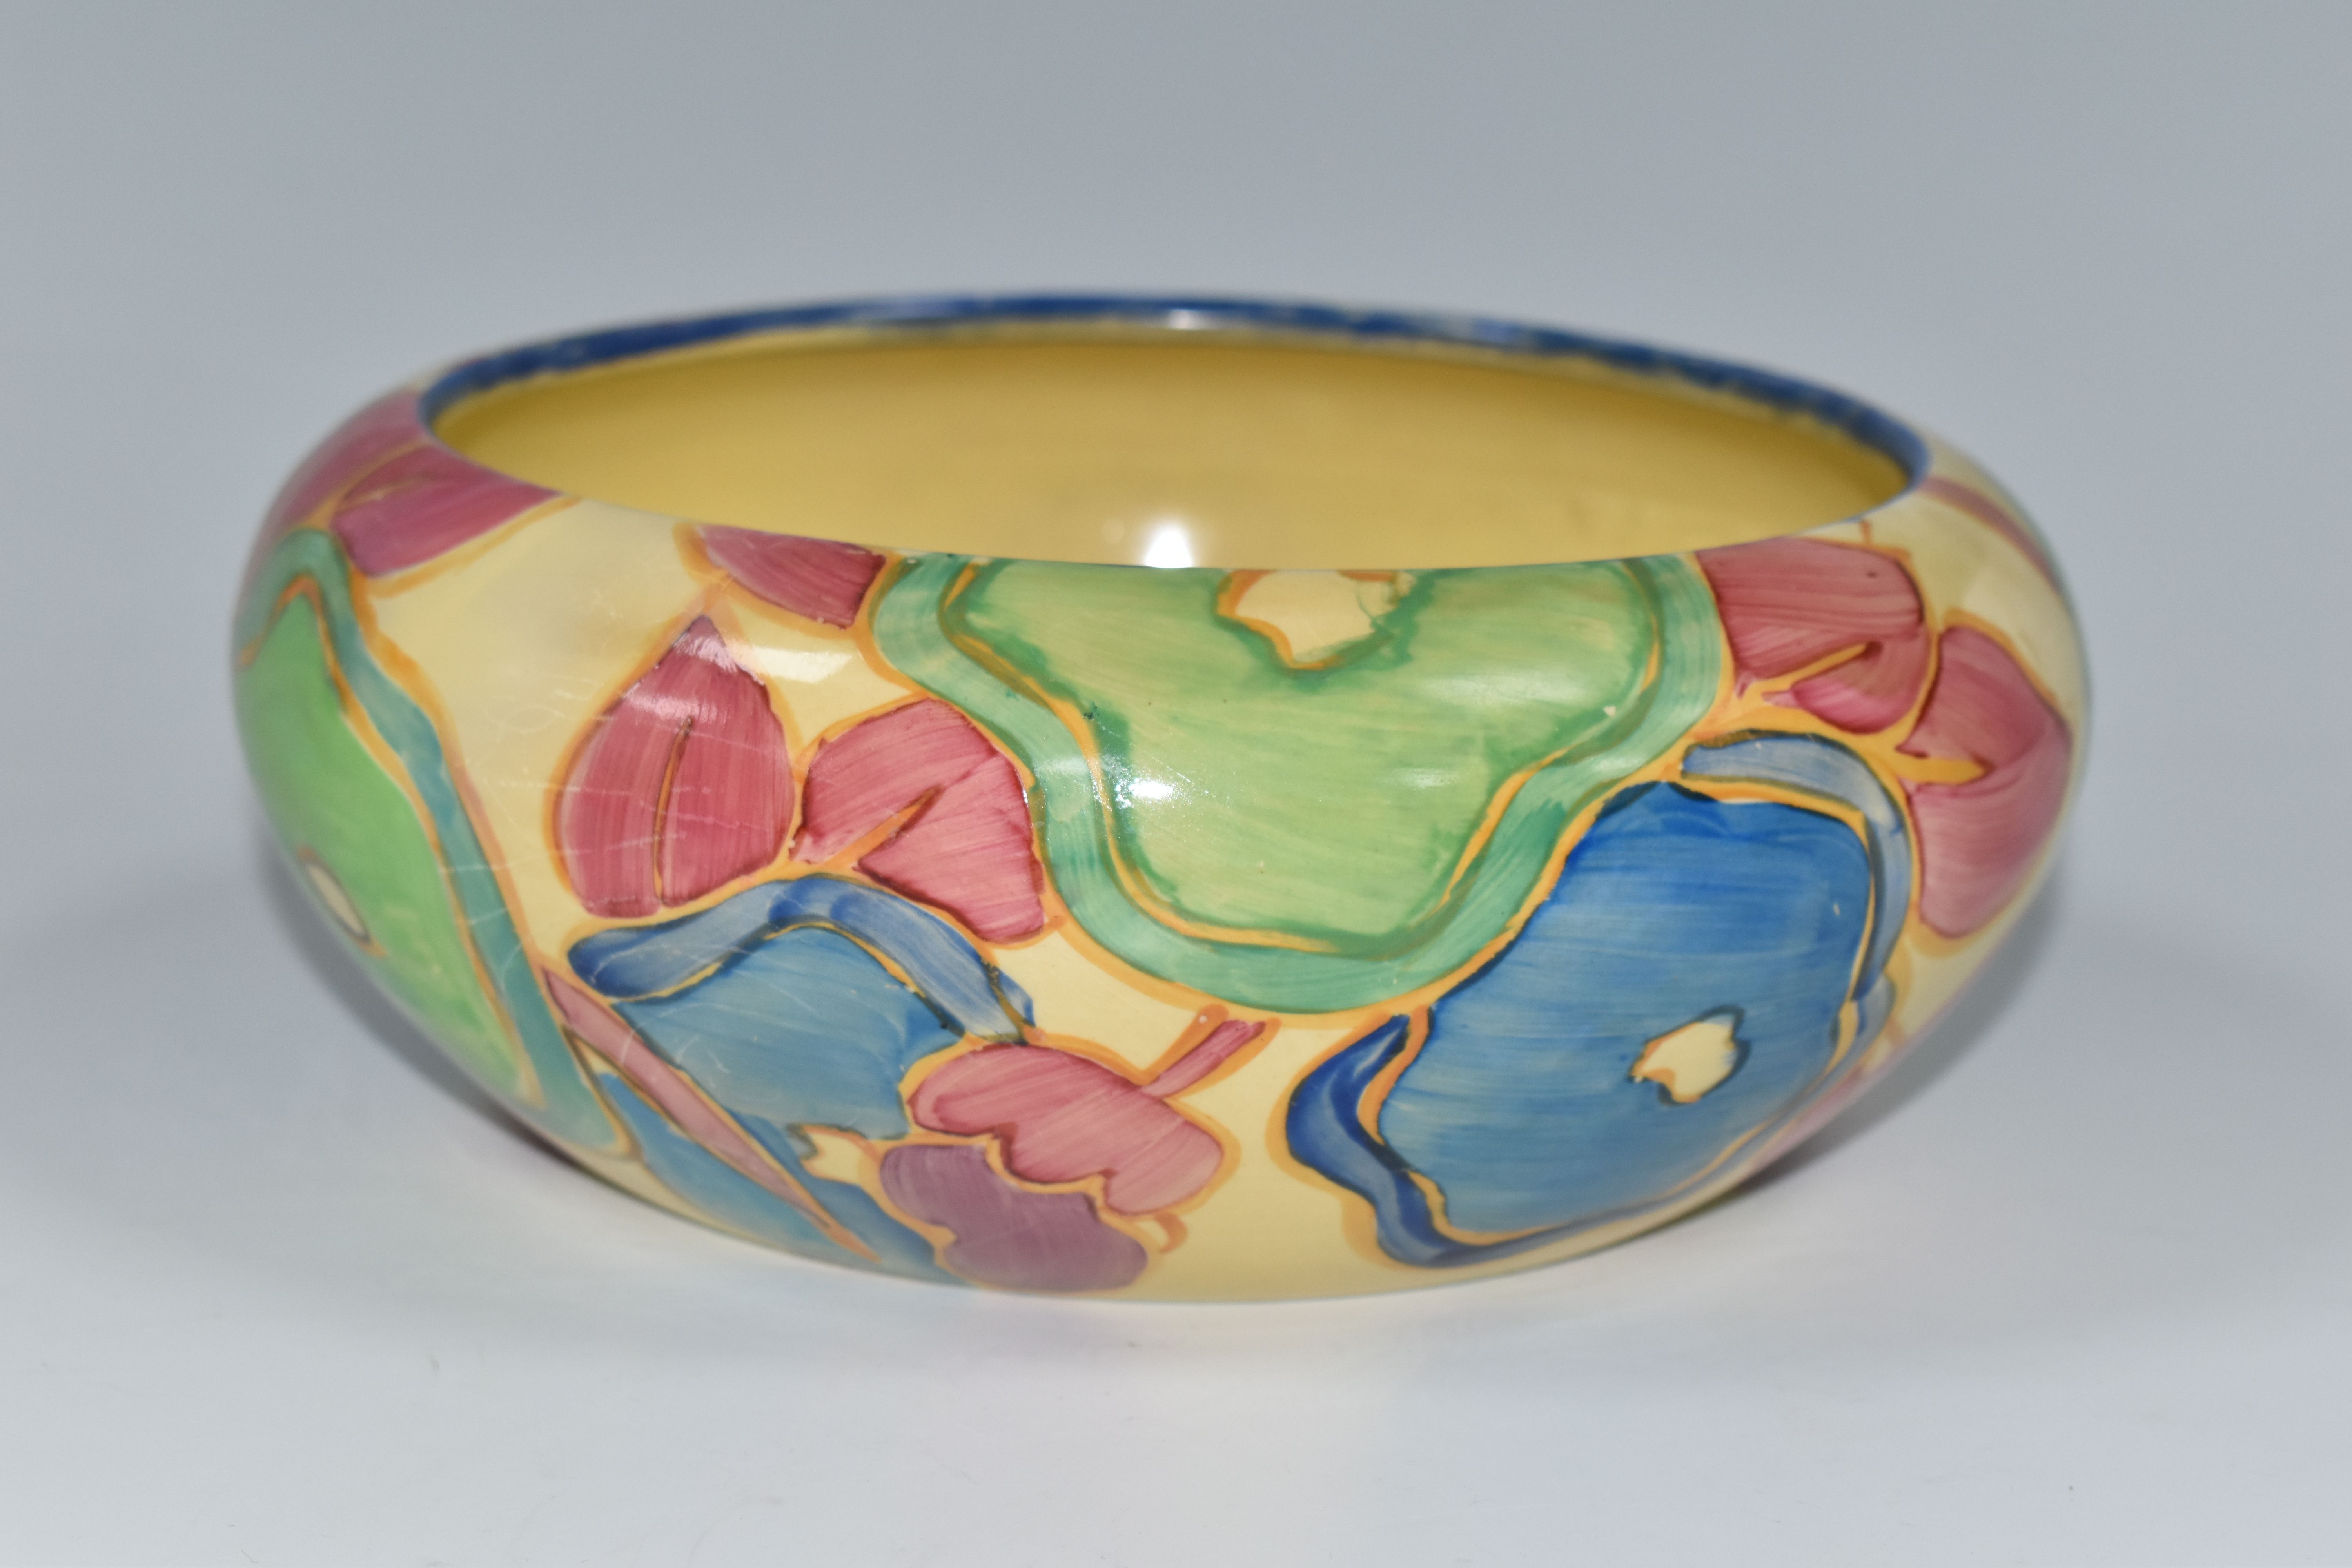 A CLARICE CLIFF FANTASQUE BIZARRE BOWL, in Blue Chintz pattern, painted with blue, pink and green